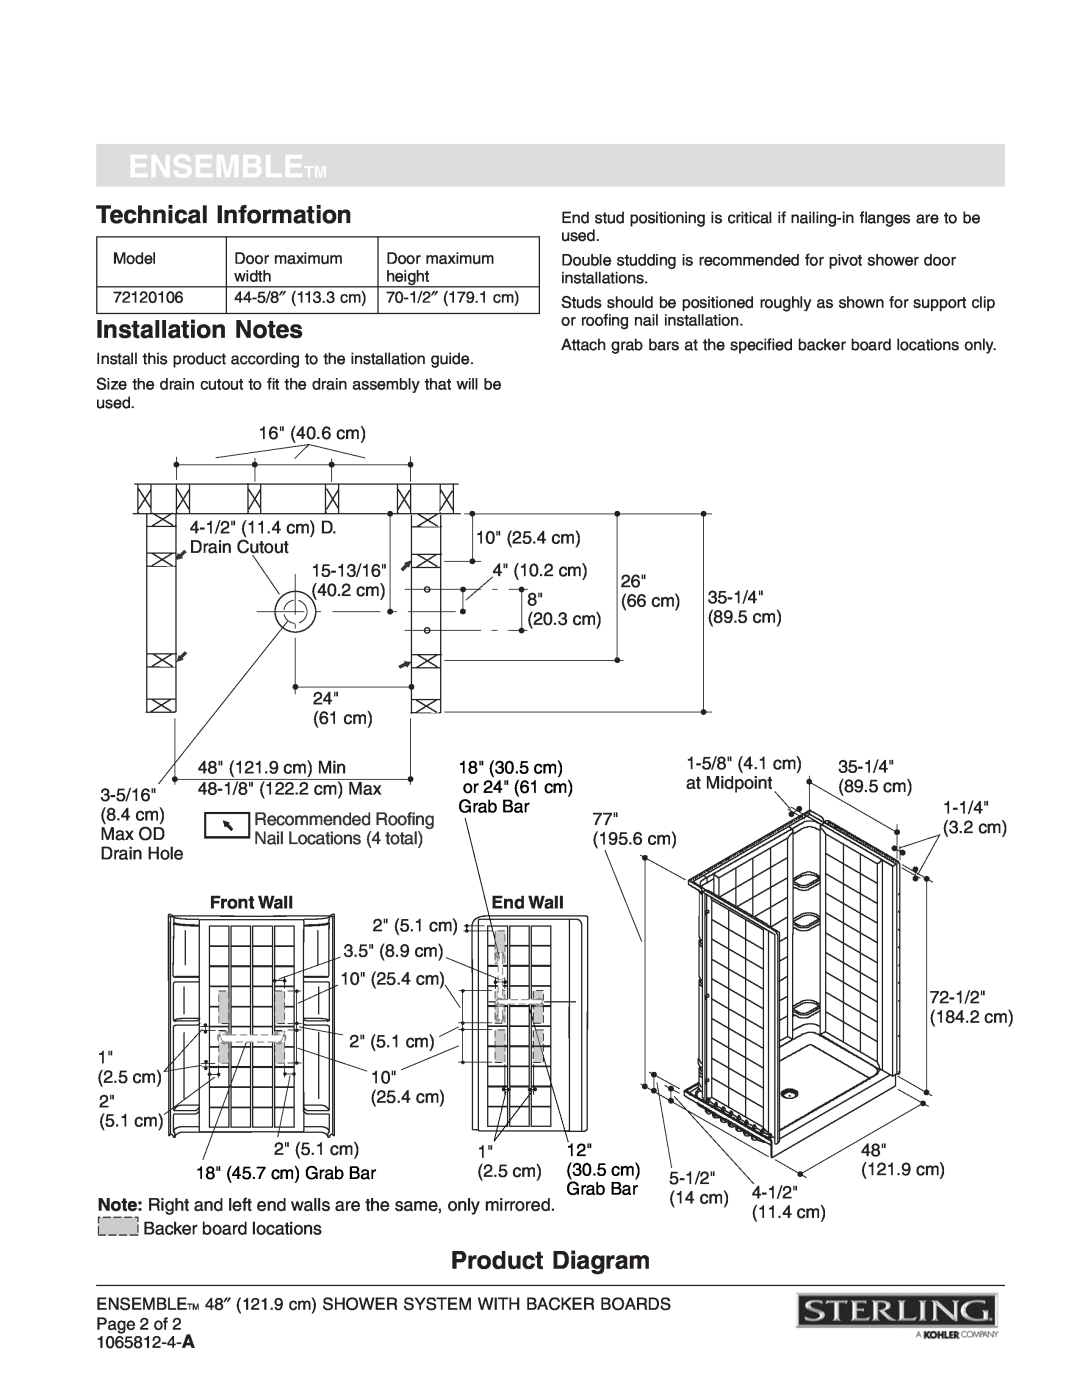 Sterling Plumbing 72120106 Technical Information, Installation Notes, Product Diagram, Ensembletm, Recommended Roofing 